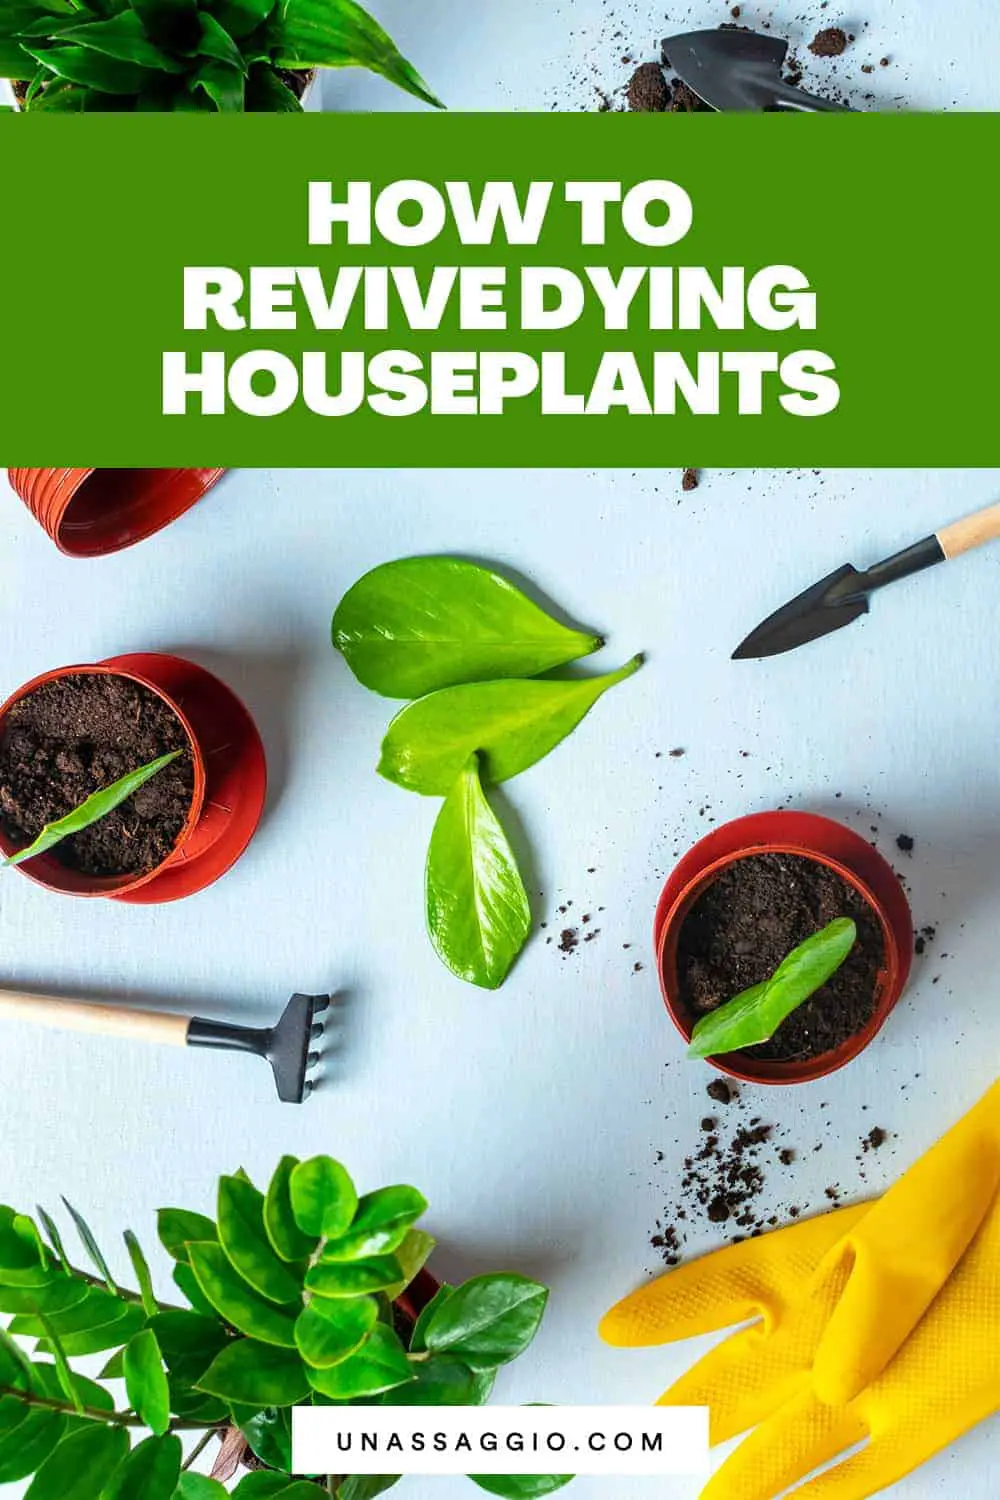 How to Revive Dying Houseplants